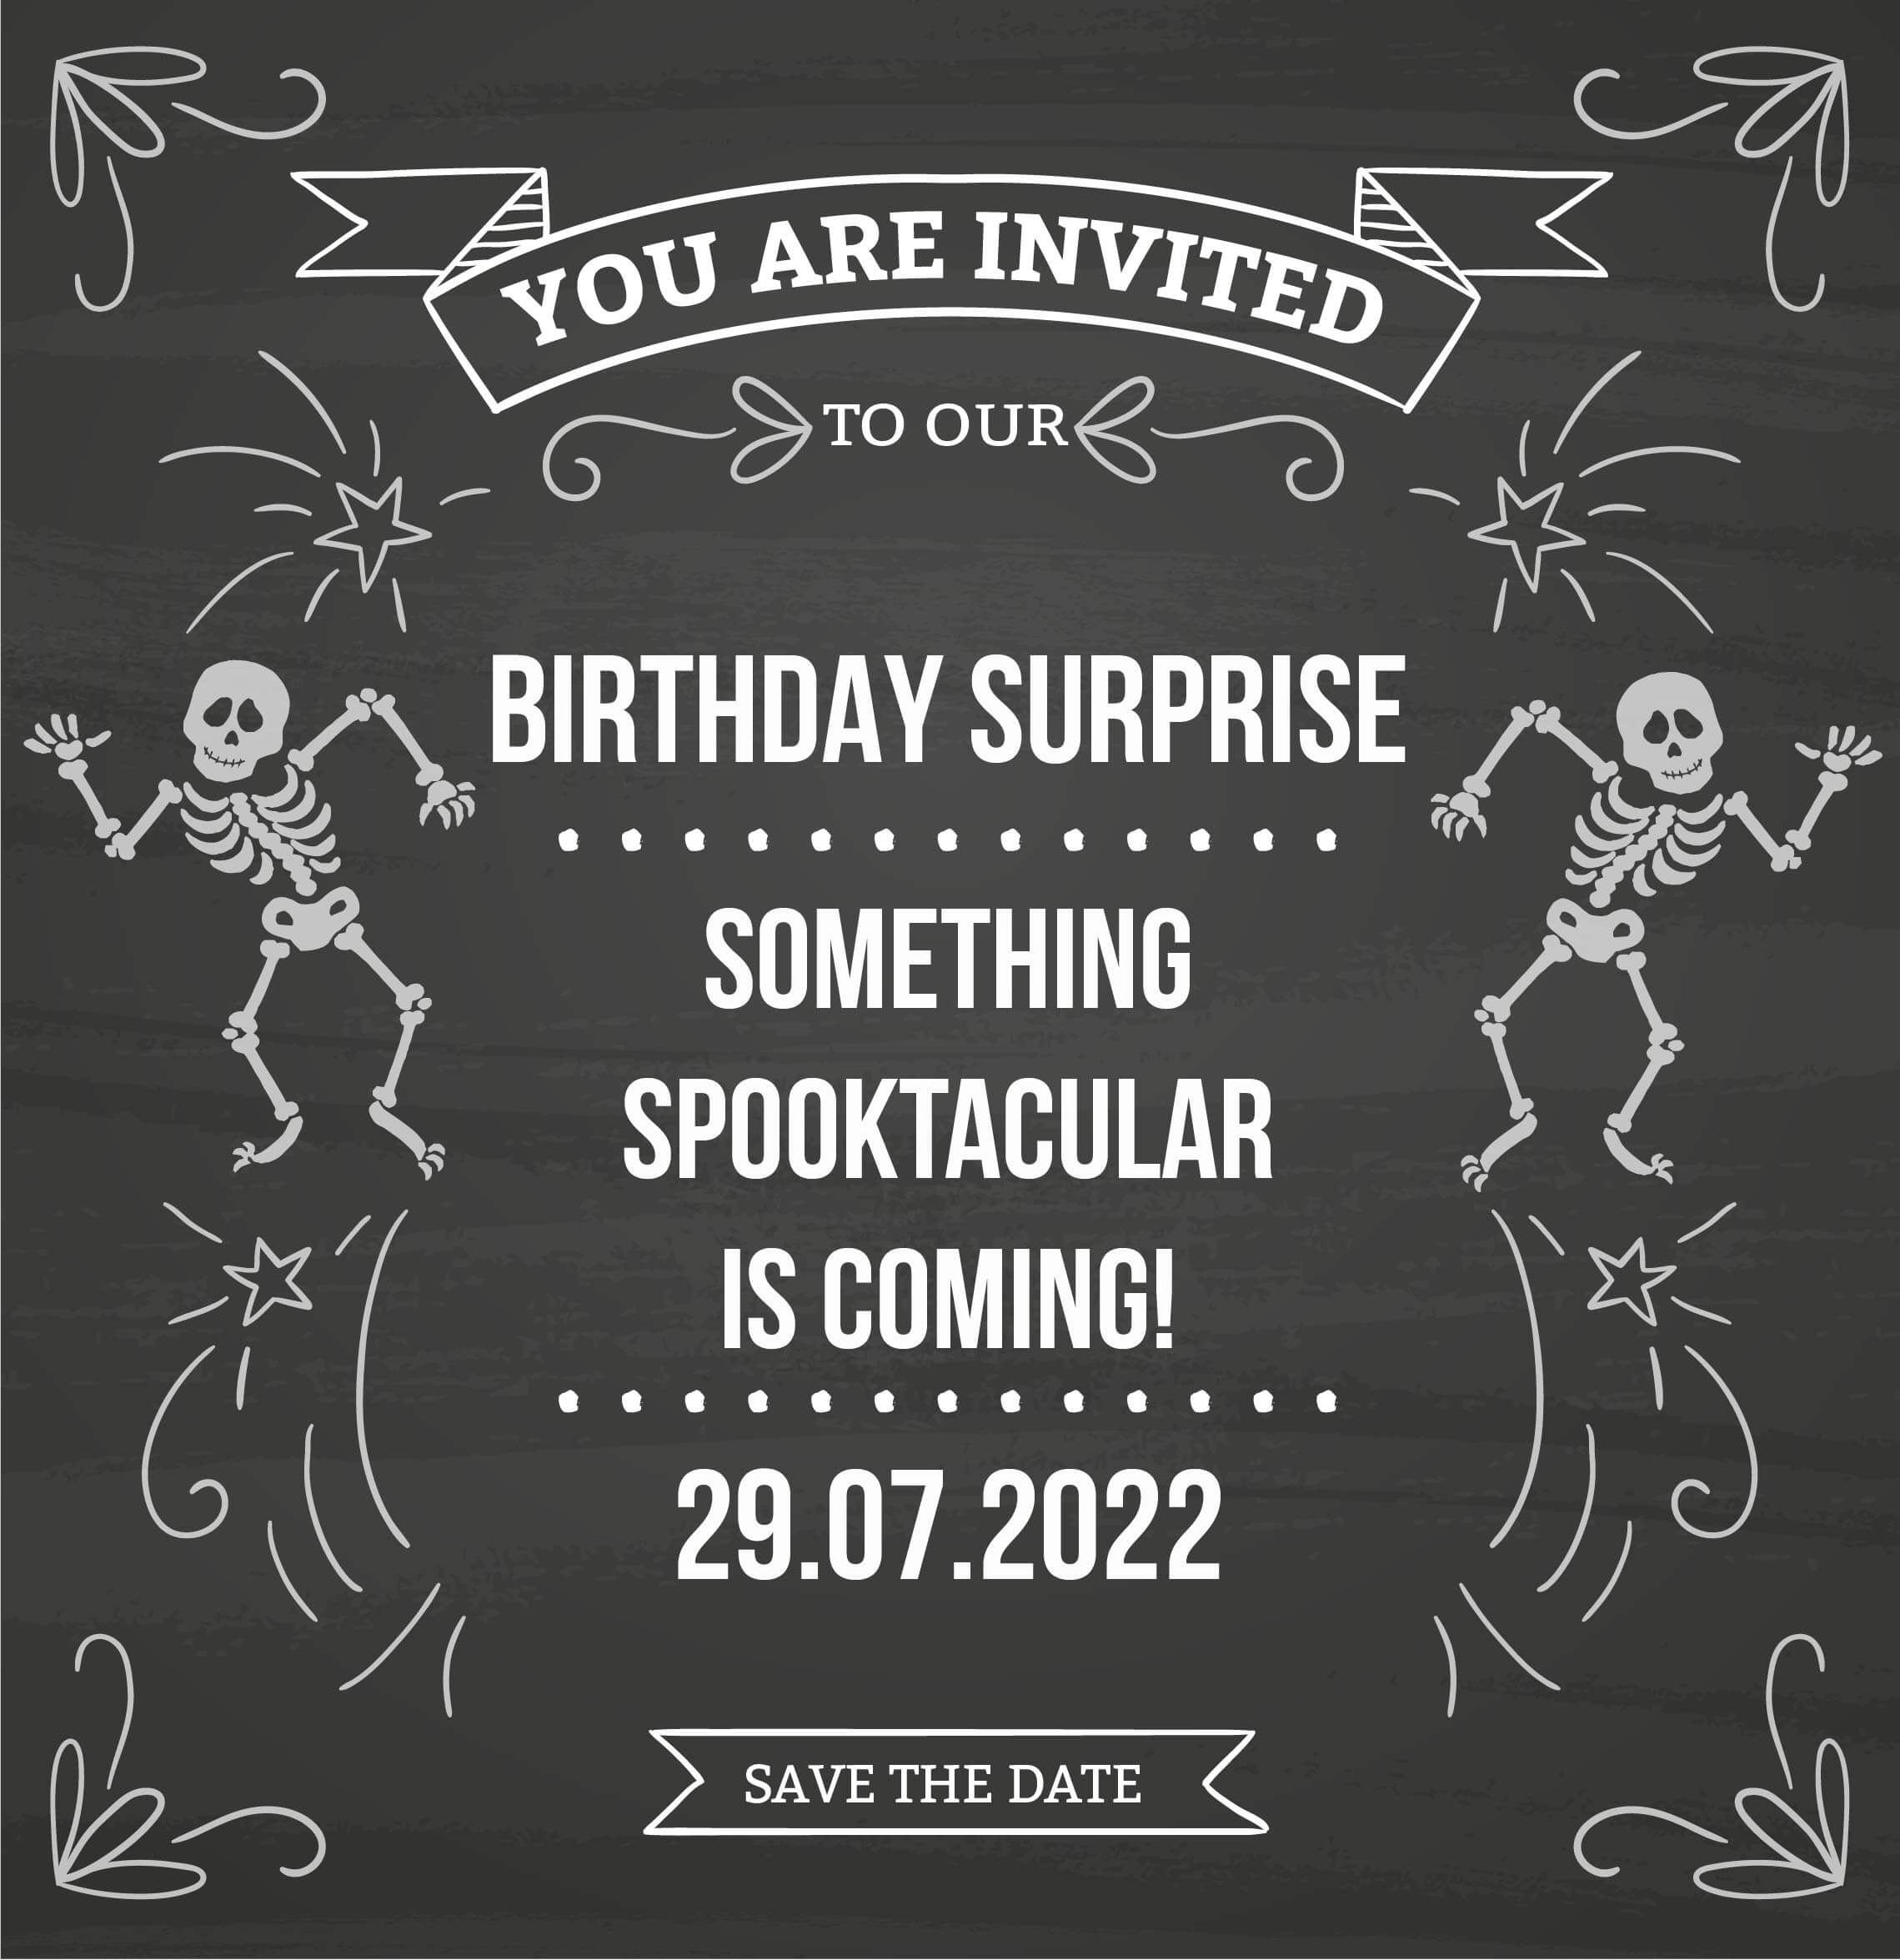 YOU ARE INVITED TO OUR BIRTHDAY SURPRISE SOMETHING SPOOKTACULAR IS COMING! 29.07.2022 SAVE THE DATE  6TOOURD f' P s N A ccccccccccccc 4 ". SOMETHING fq; R y T 3 * LT j* LN RAIY. x @Q 